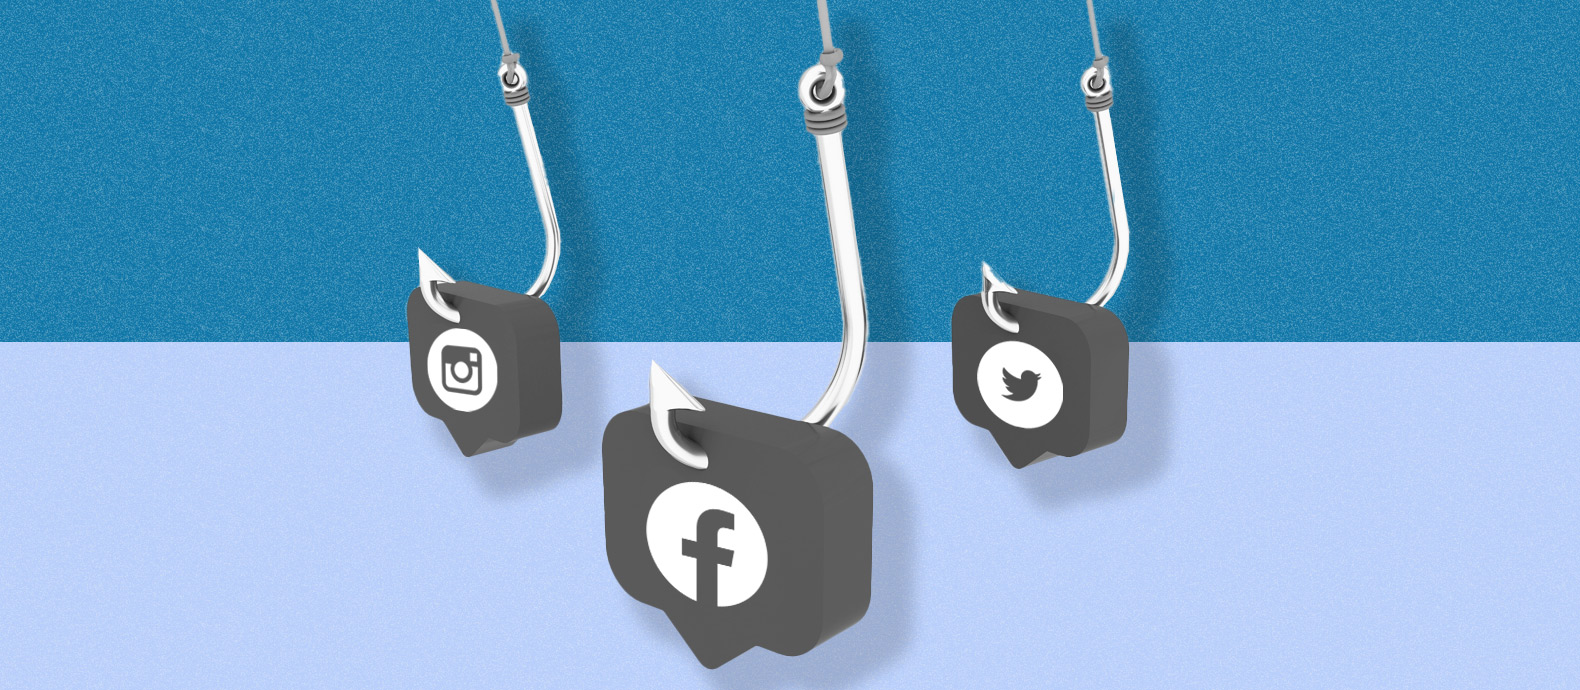 9 examples of social media phishing schemes and how to avoid it